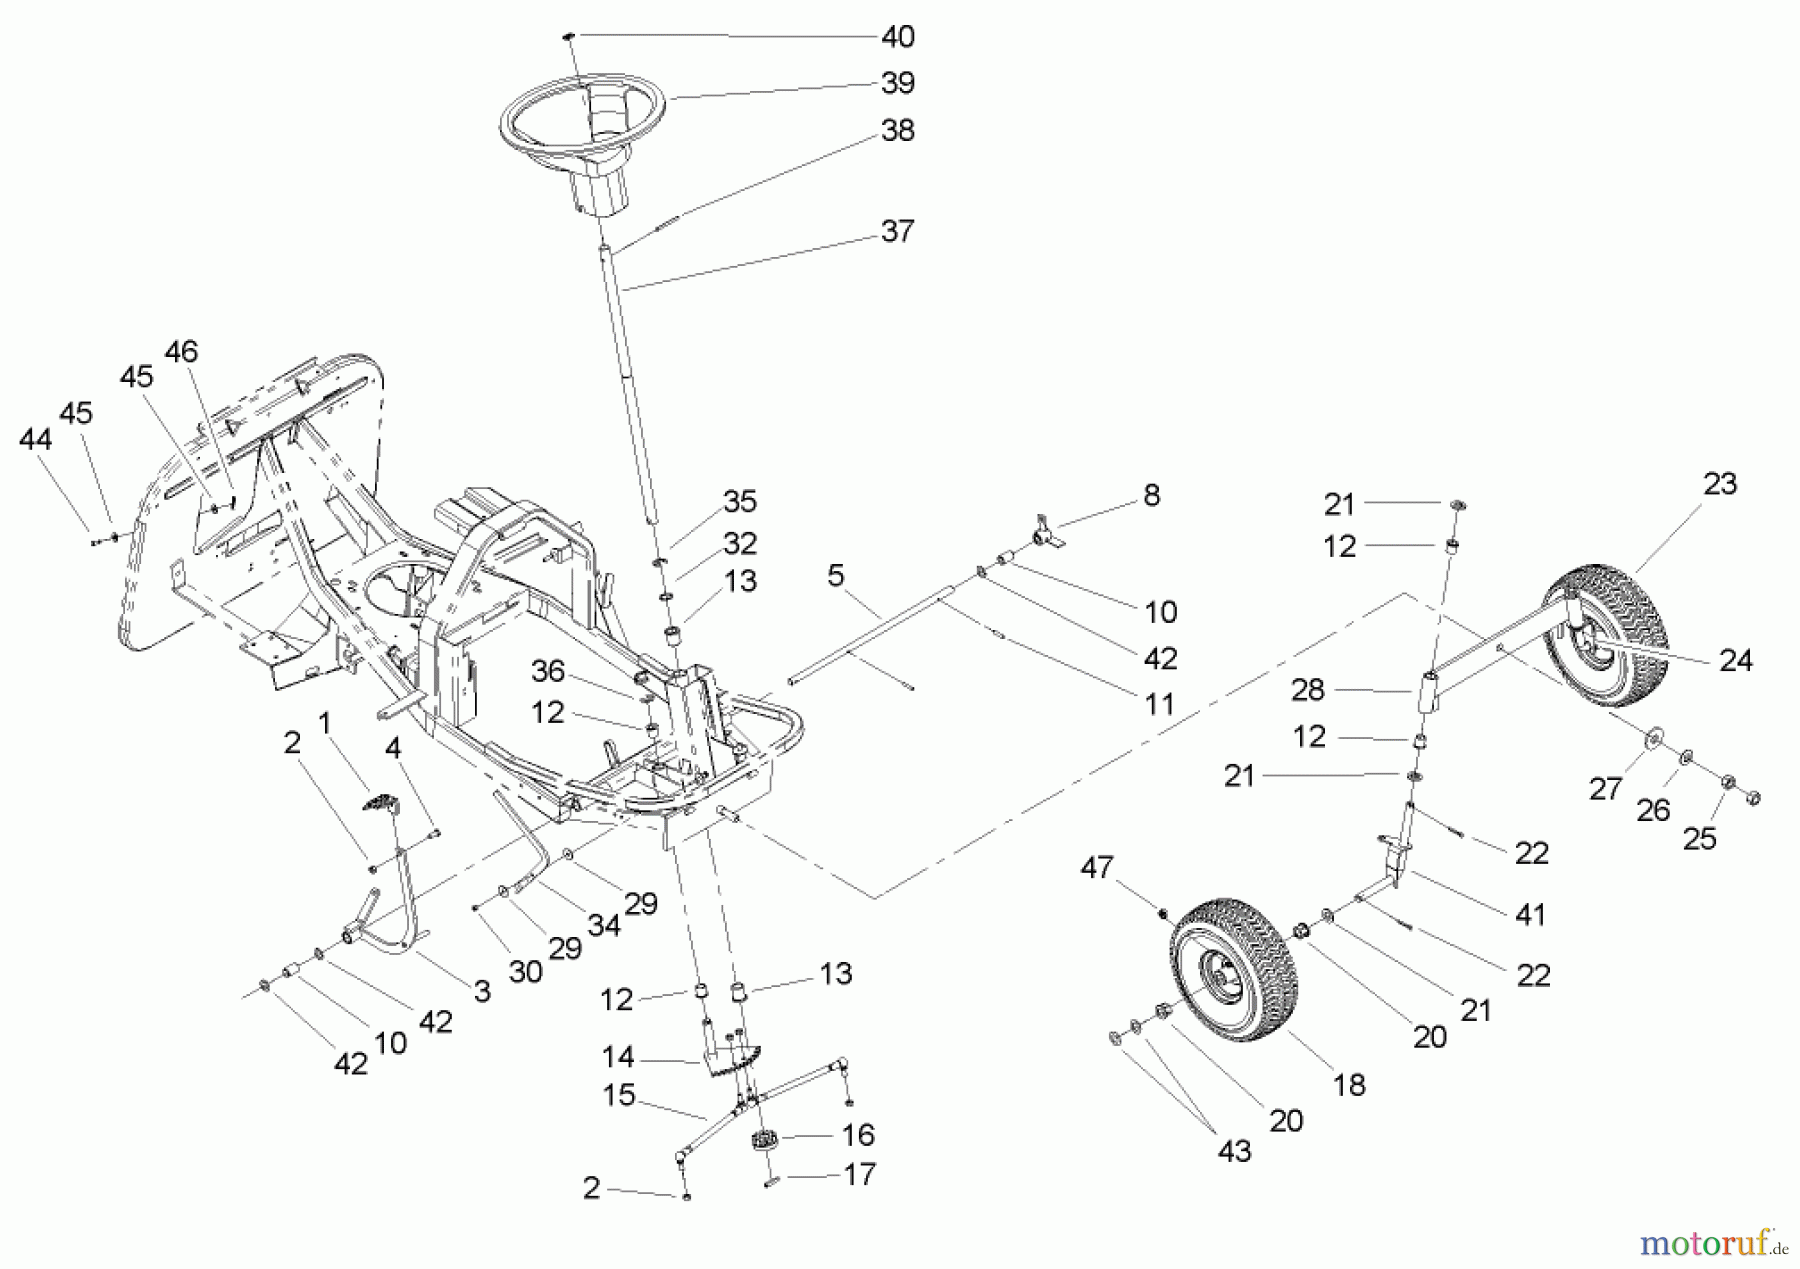  Toro Neu Mowers, Rear-Engine Rider 70185 (G132) - Toro G132 Rear-Engine Riding Mower, 2007 (270000001-270805705) FRONT AXLE AND STEERING ASSEMBLY